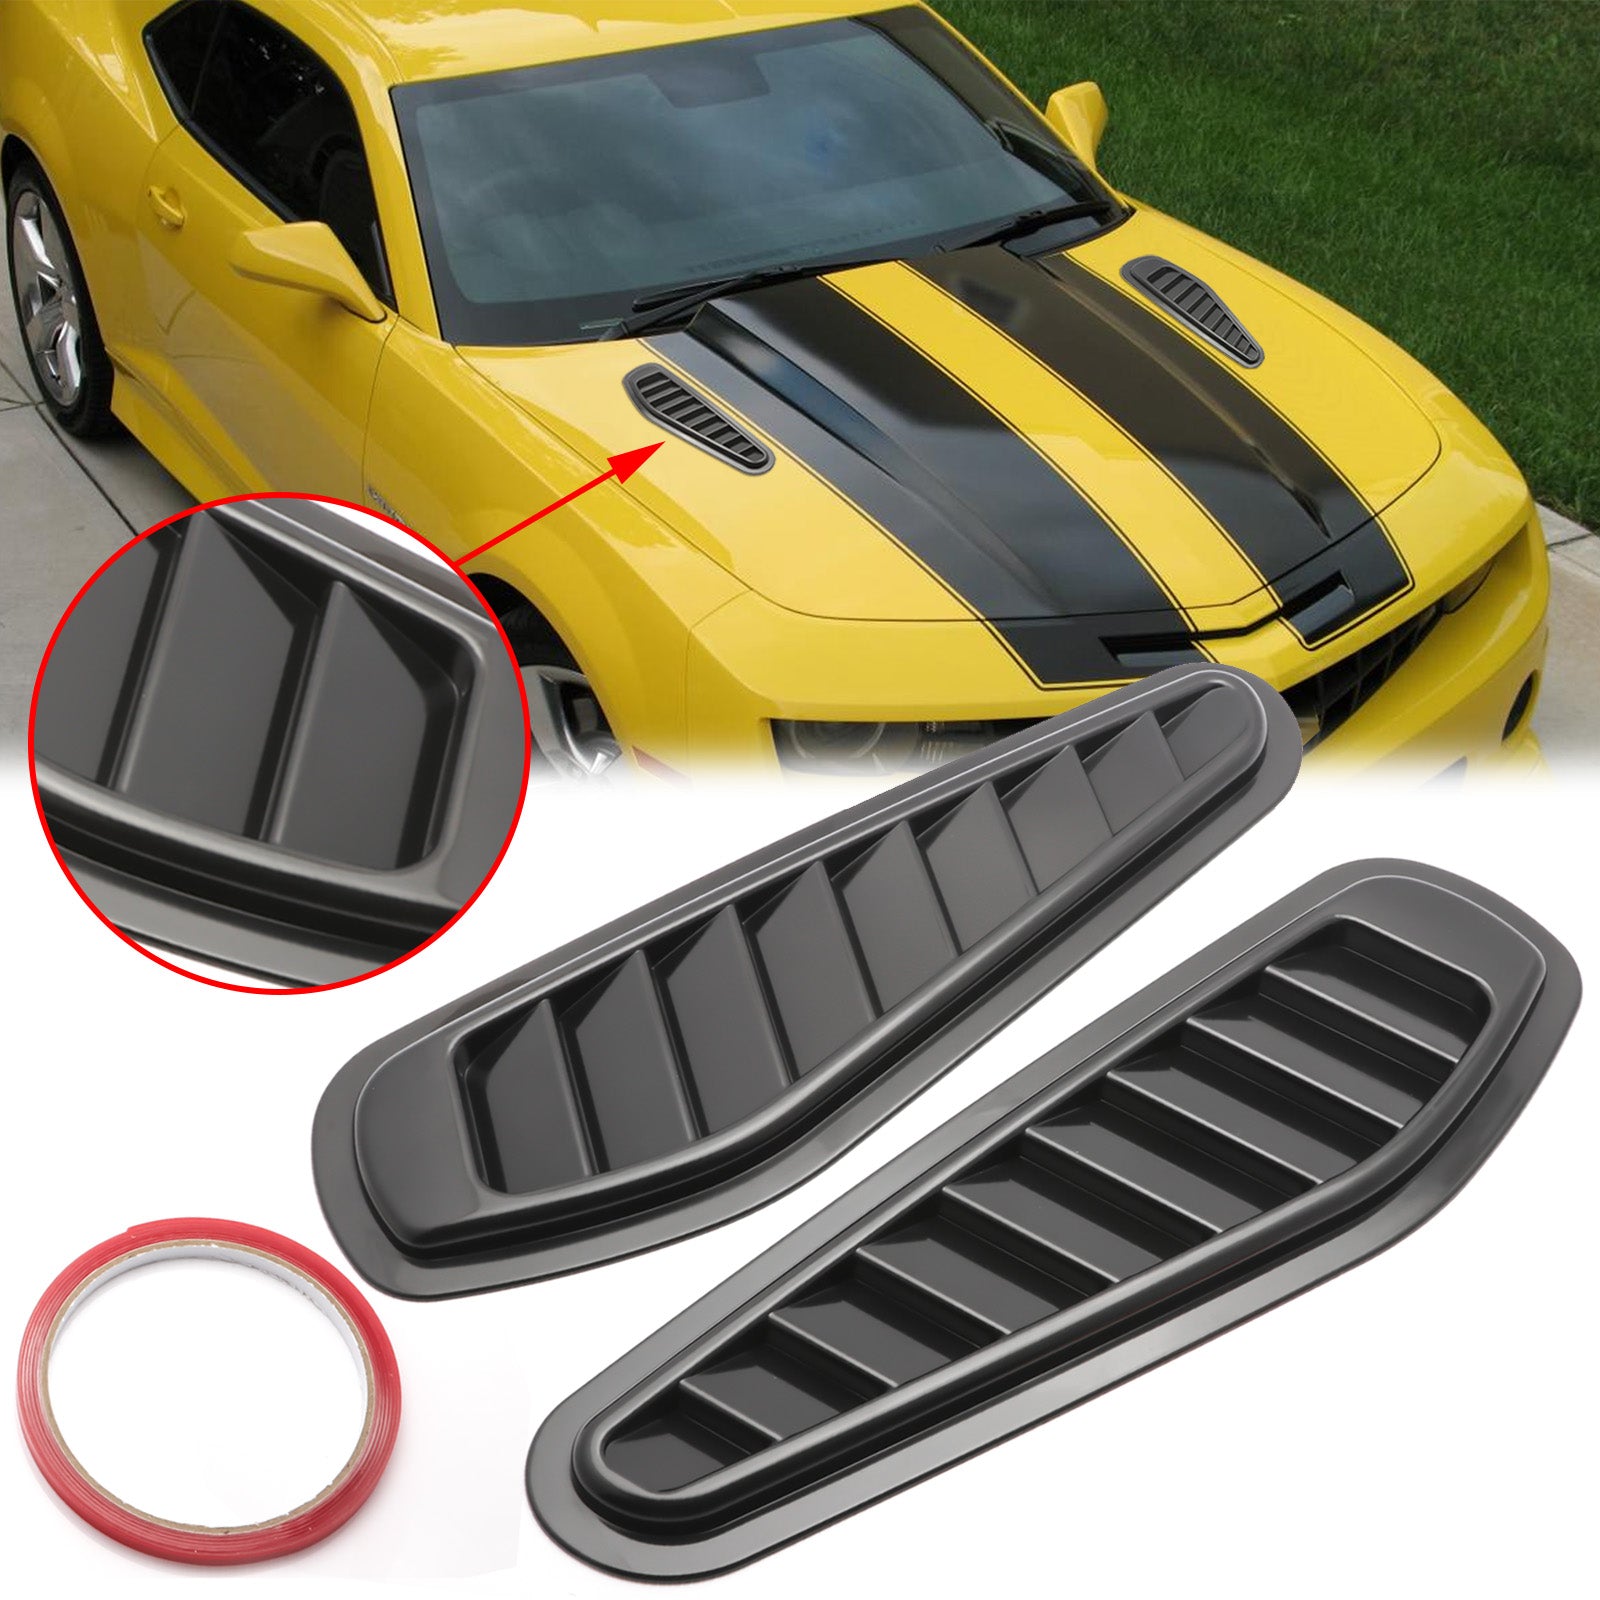 Cheap Universal Car Hood Side Air Intake Flow Vent Cover